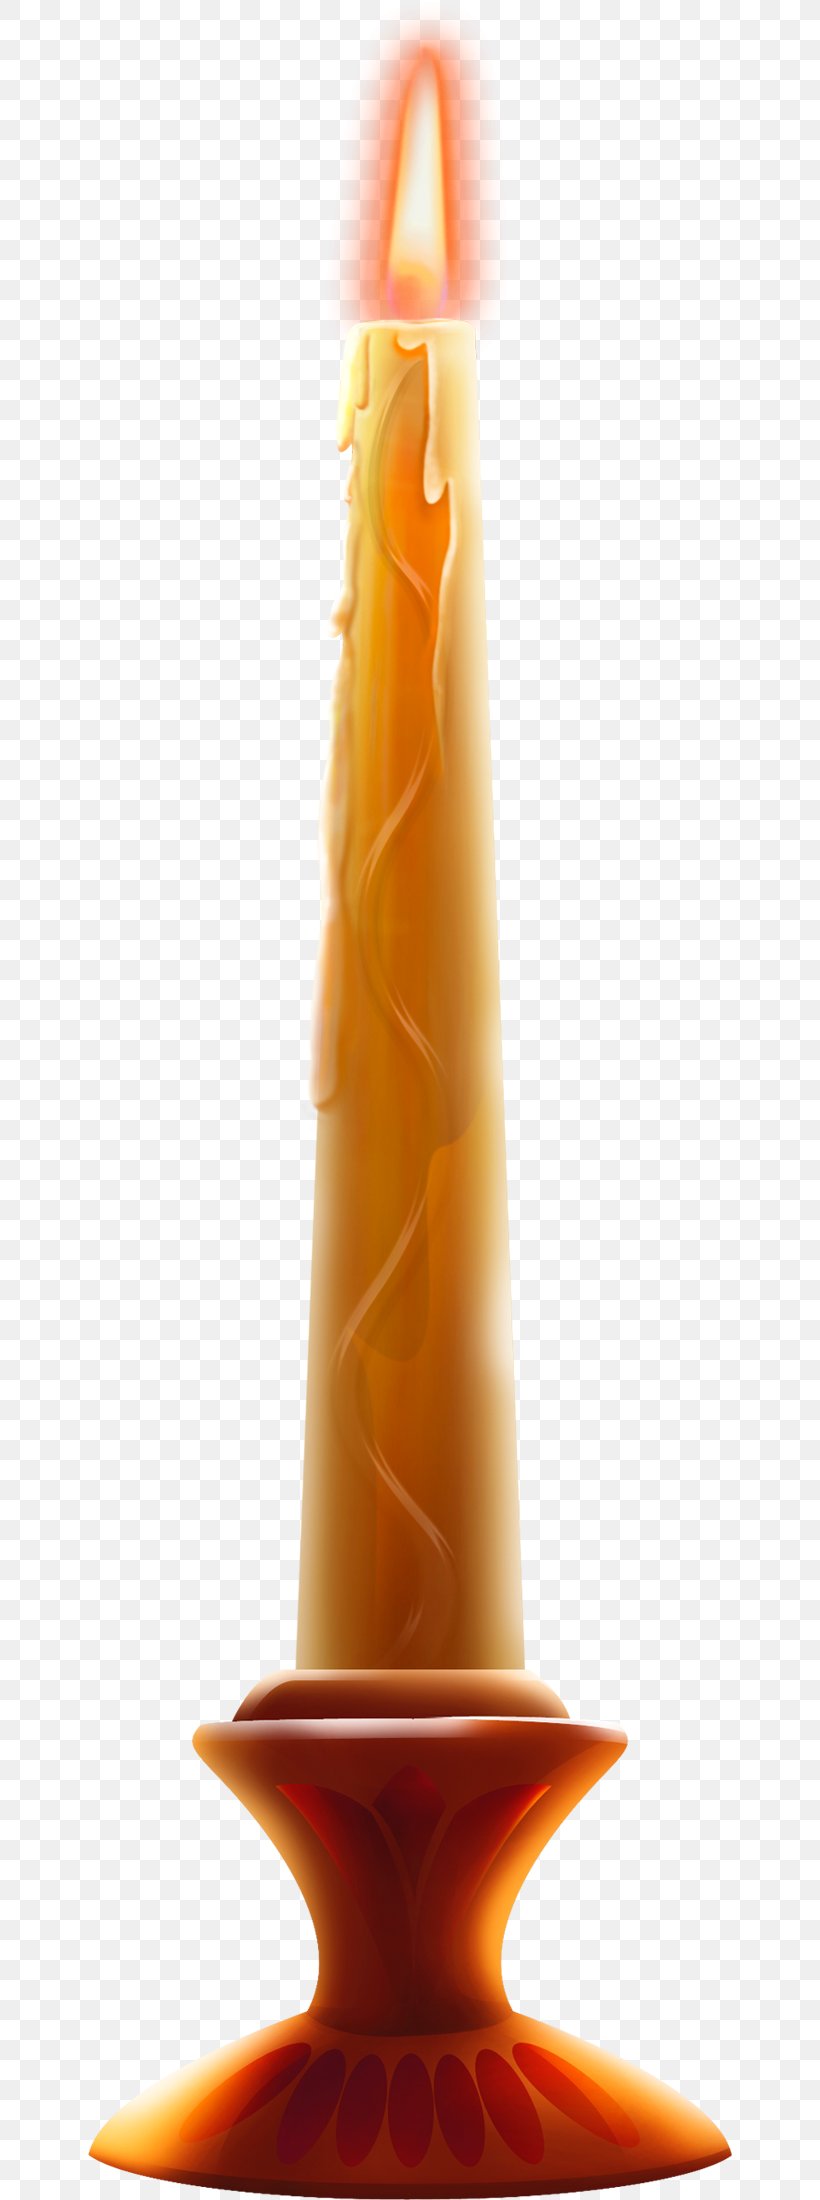 Candle Euclidean Vector, PNG, 644x2200px, Lighting, Orange, Product Design Download Free